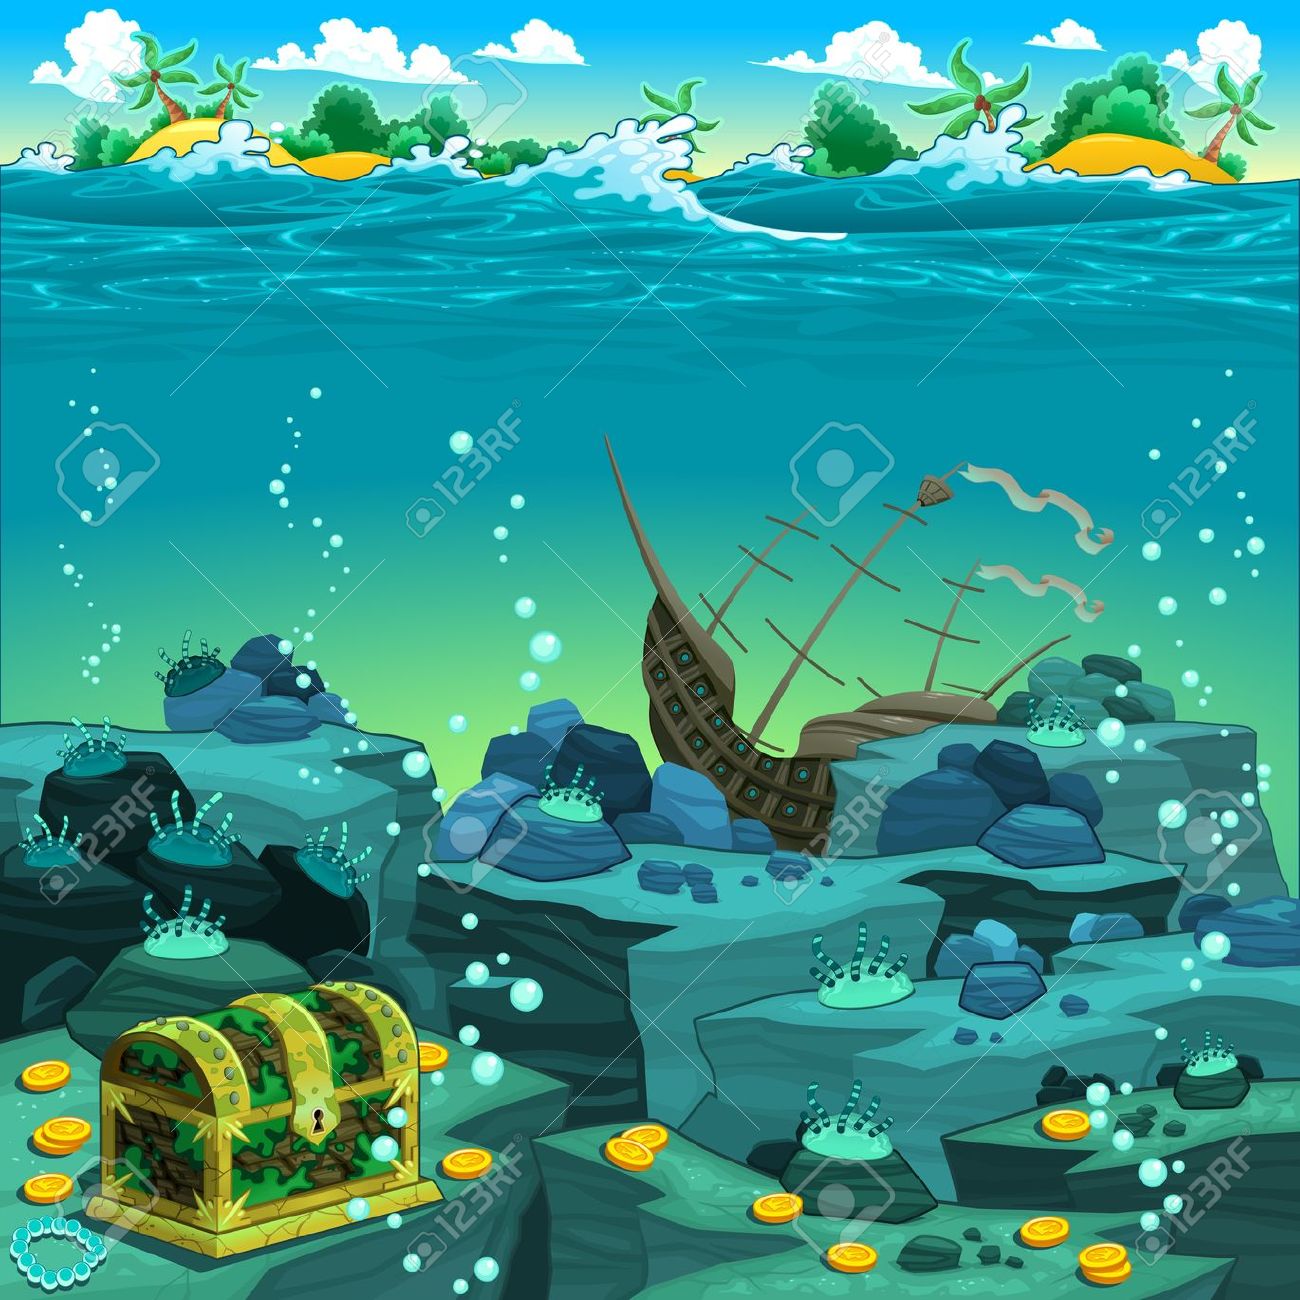 Seascape clipart #9, Download drawings